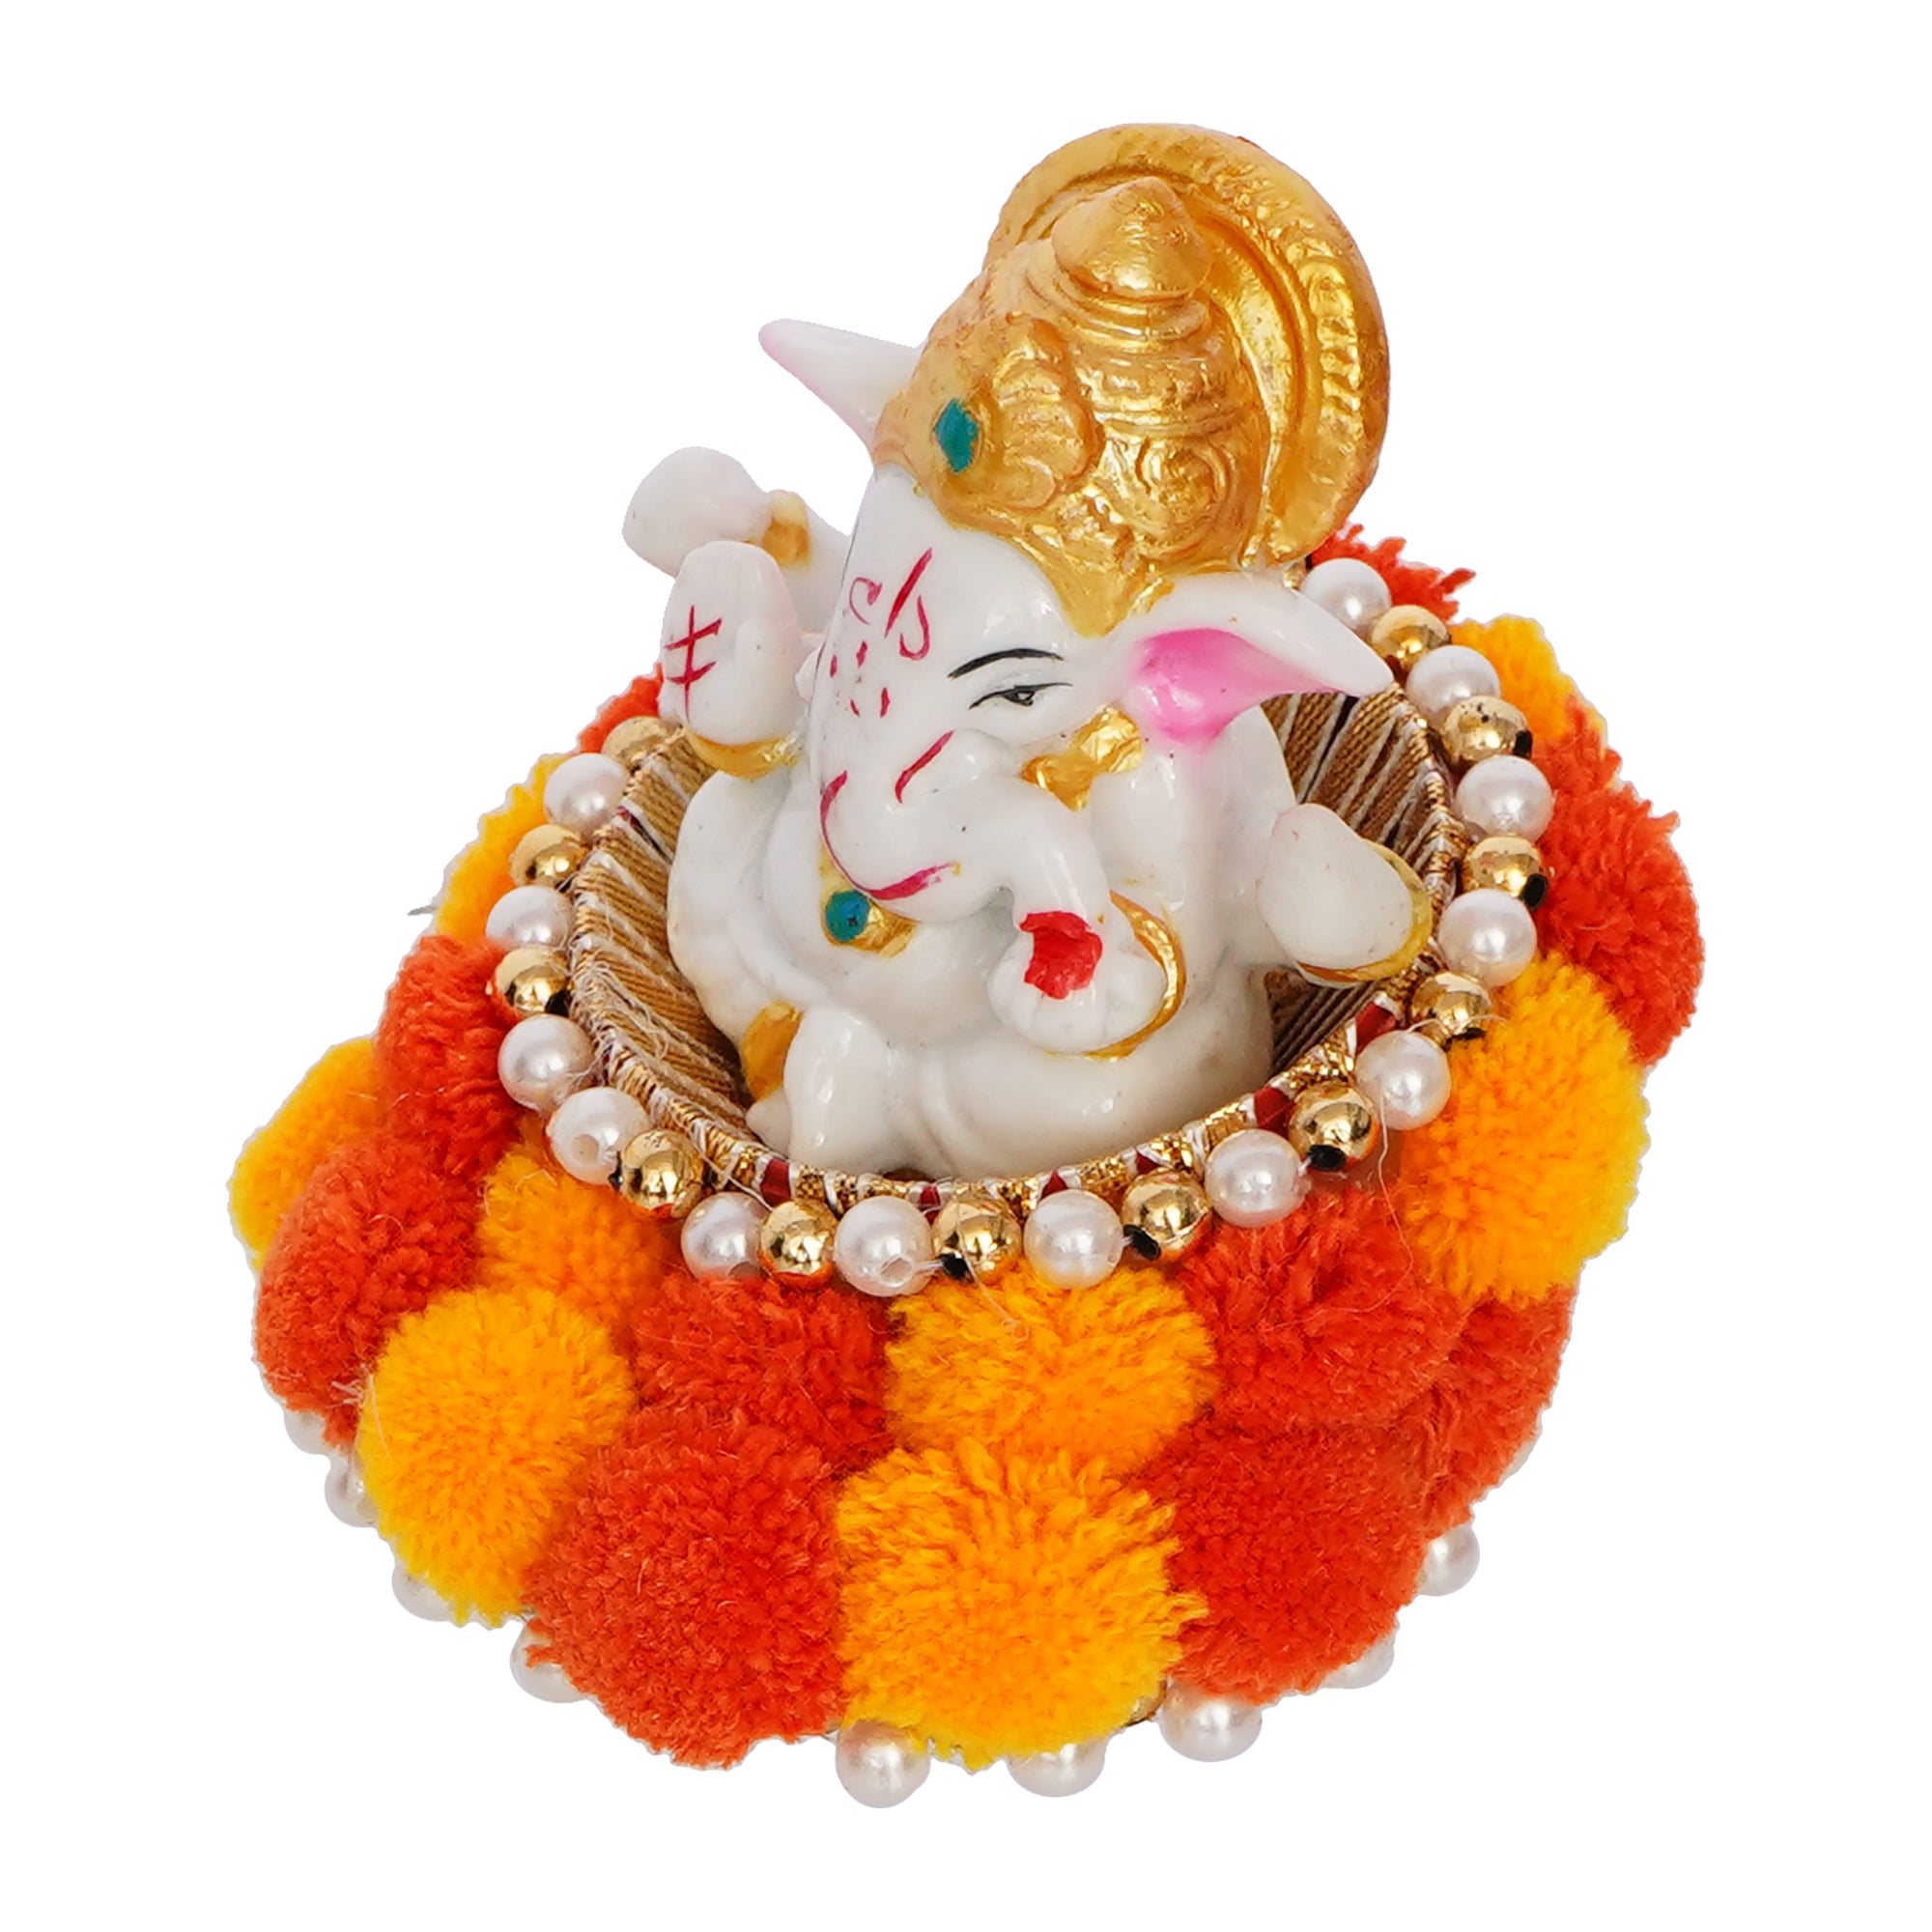 Polyresin Lord Ganesha Idol on Decorative Handcrafted Floral Plate for Home and Car Dashboard 5